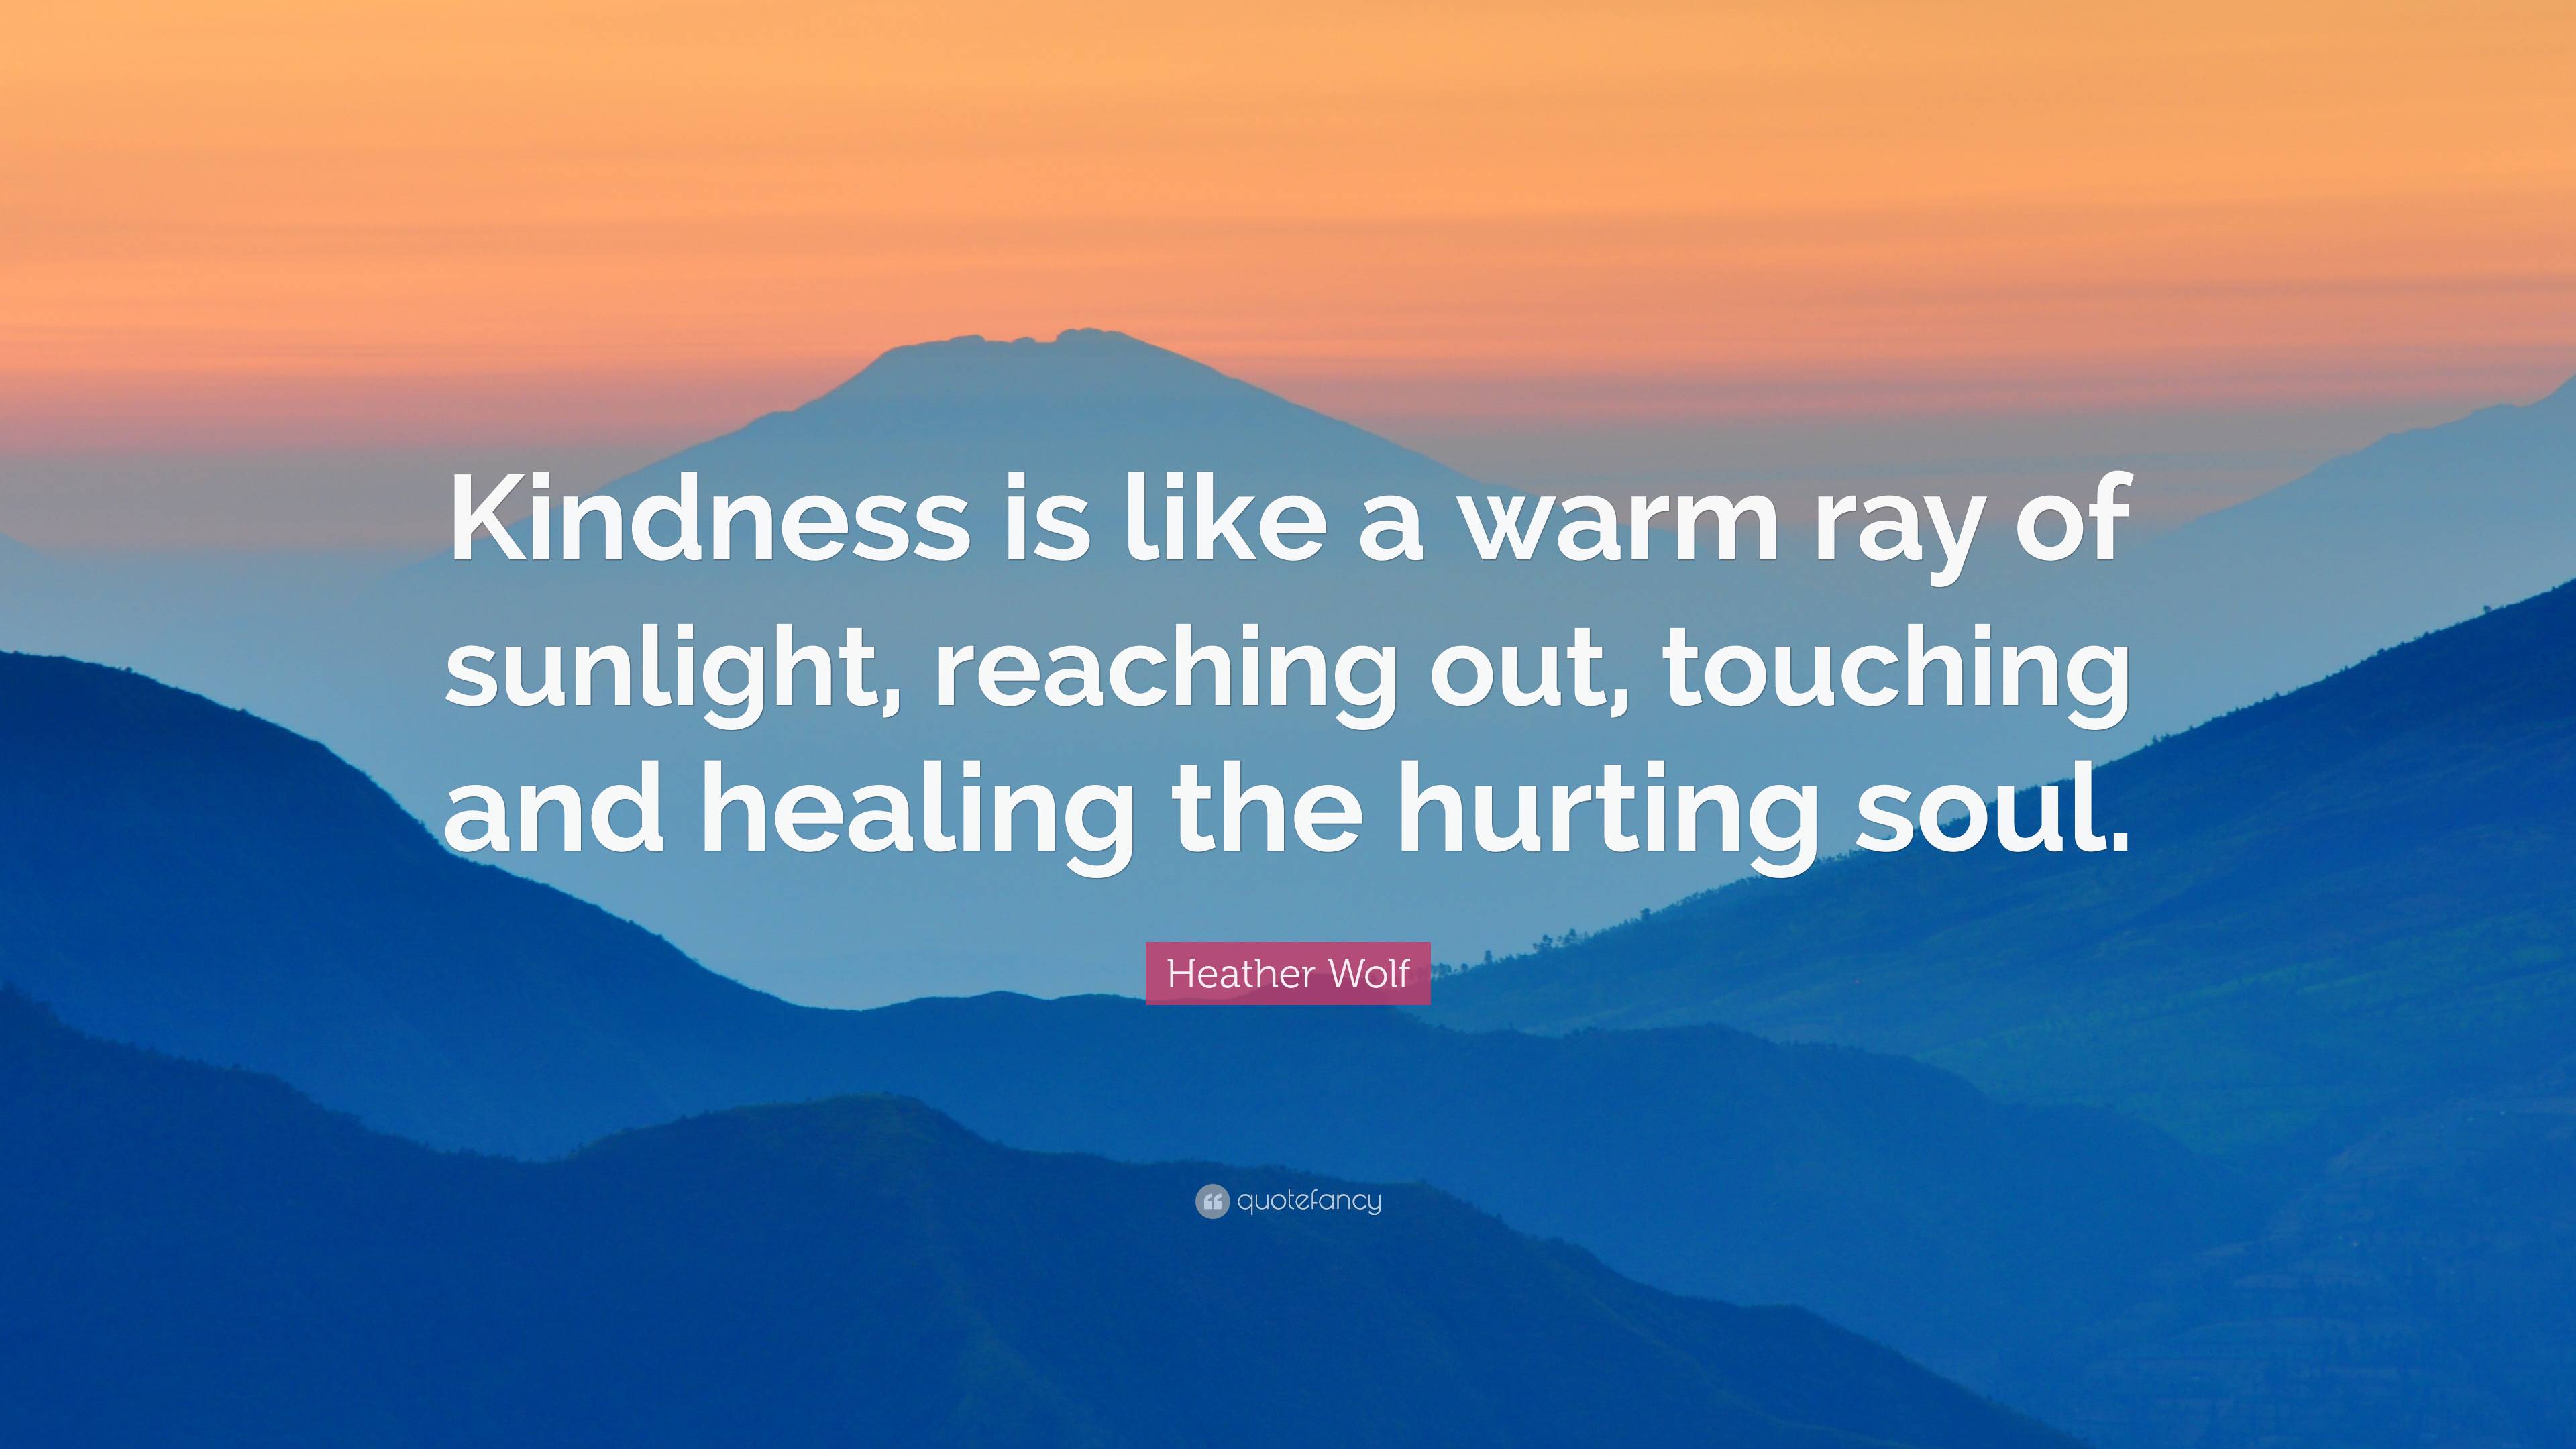 Heather Wolf Quote: “Kindness is like a warm ray of sunlight, reaching ...